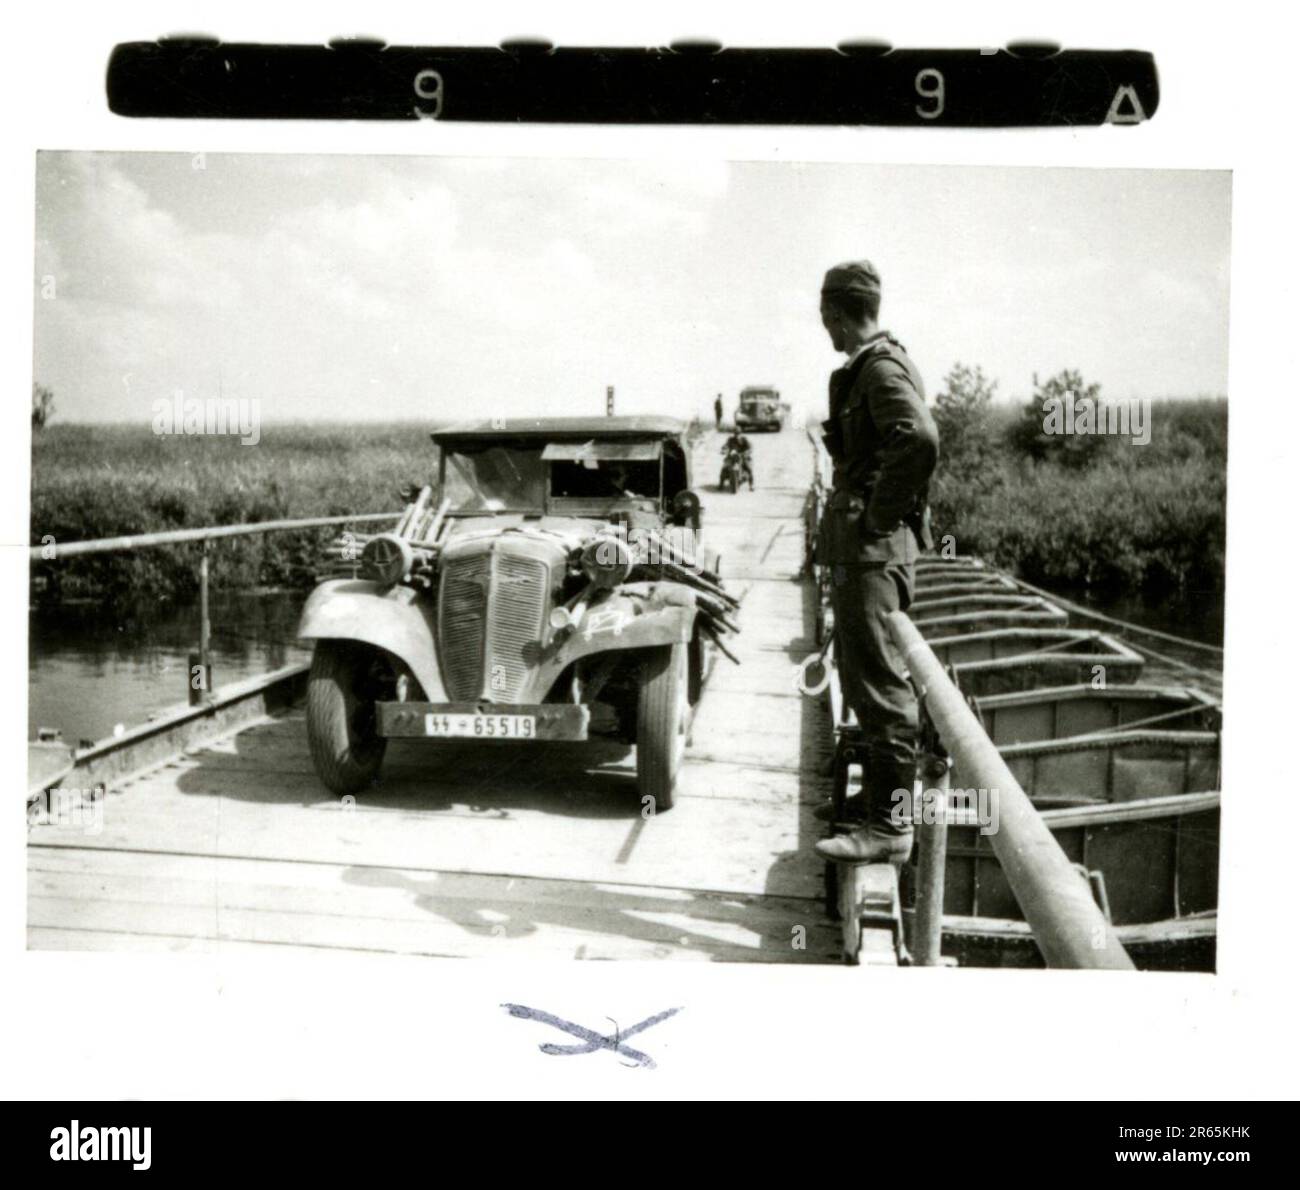 SS Photographer Baumann, Totenkopf Division, Russia 1941 Wheeled reconnaissance unit , photos of motorcycles, flak guns, graves, Russian prisoners of war and villagers, Fieseler Fi 156 Storch, destroyed Russian tanks and equipment, bridge building, soldiers swimming in river, machine gun crew, anti-tank gun crew, unit awards ceremony, units on the march, artillery towed by halftracks, motor vehicle maintenance unit, Kriegsberichter activities, field bakery, field hospital, air resupply by JU-52, antiaircraft searchlight unit, field post office, and a  Focke-Wulf 189 (Eagle-Owl) in flight.  Ima Stock Photo